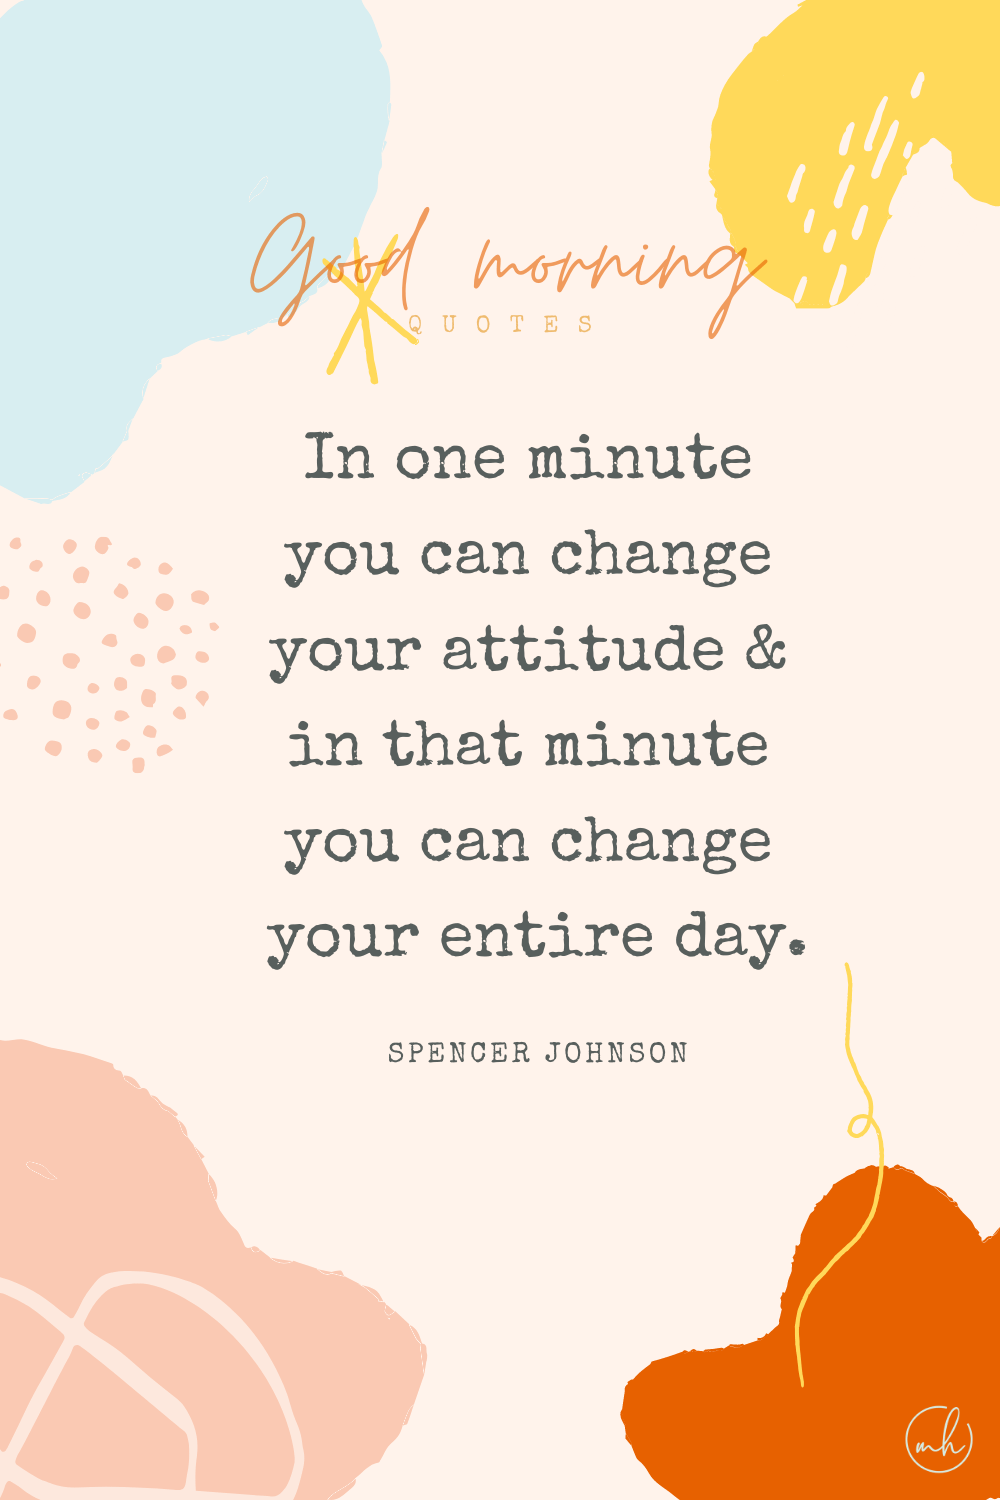 "In one minute you can change your attitude, and in that minute you can change your entire day." – Spencer Johnson